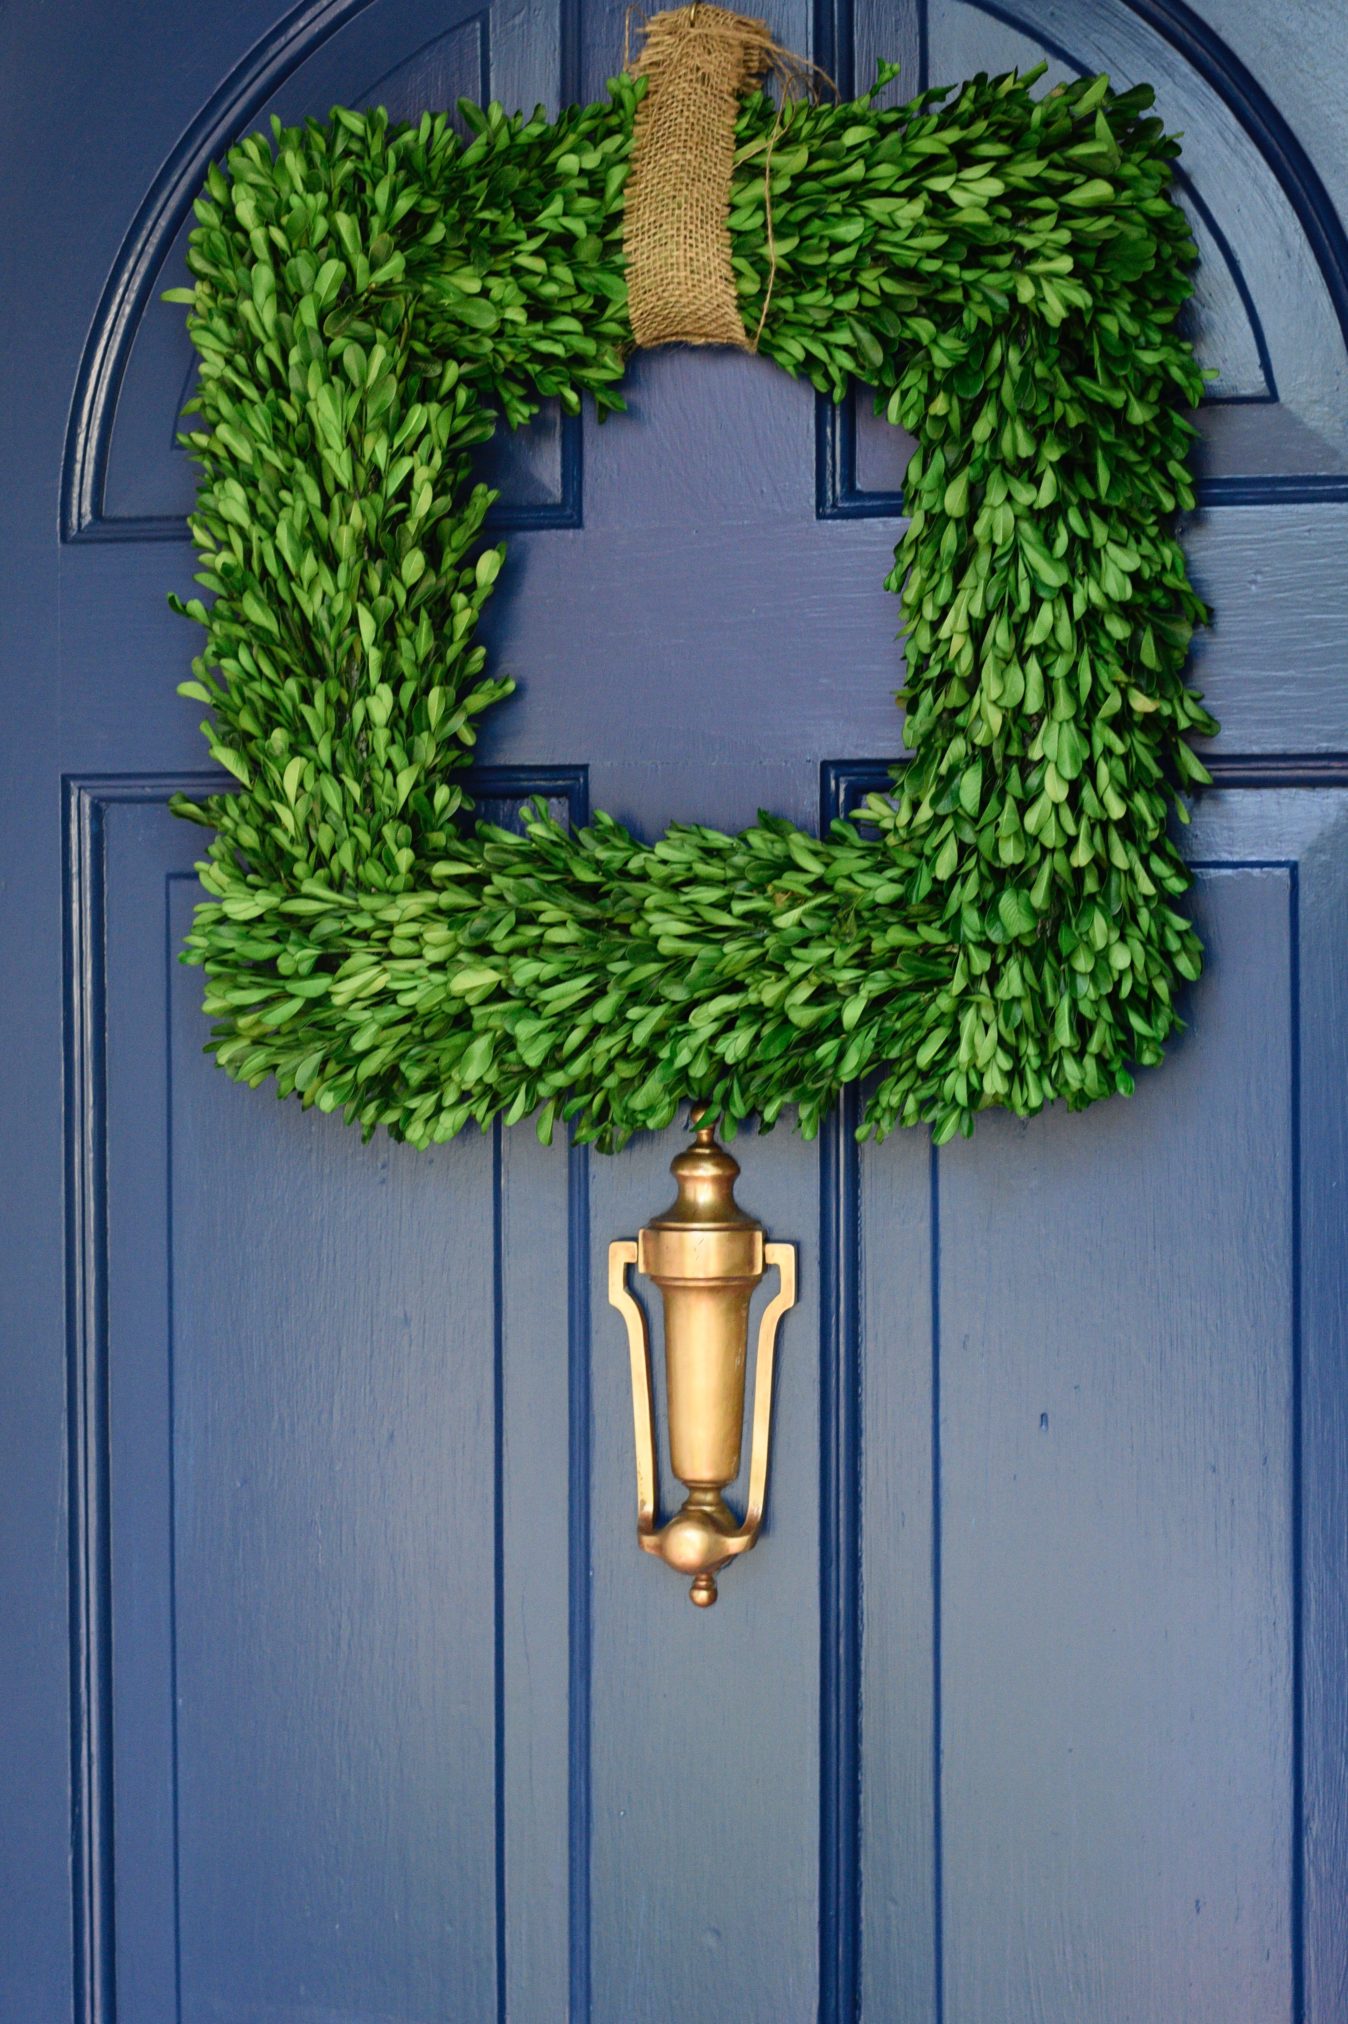 Here are some easy go to tips to adding curb appeal to your home, from a pop of color front door to planters. For me, check out www.homewithkeki.com #curbappeal #popofcolor #interiors. #homedesign